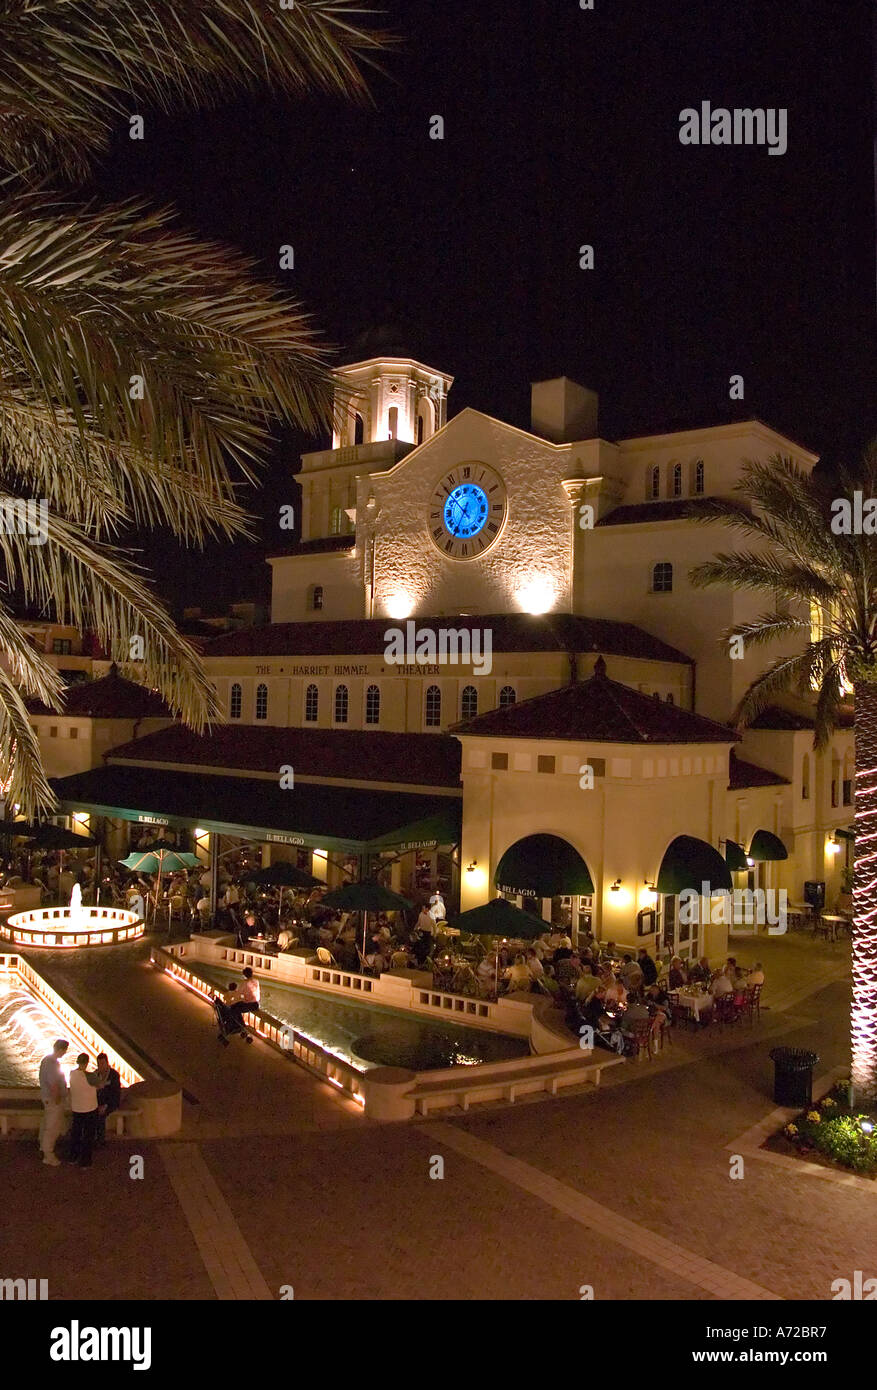 Night view of rear of Harriet Himmel Gilman Theater and Il Bellagio restaurant City Place West Palm Beach Florida Stock Photo